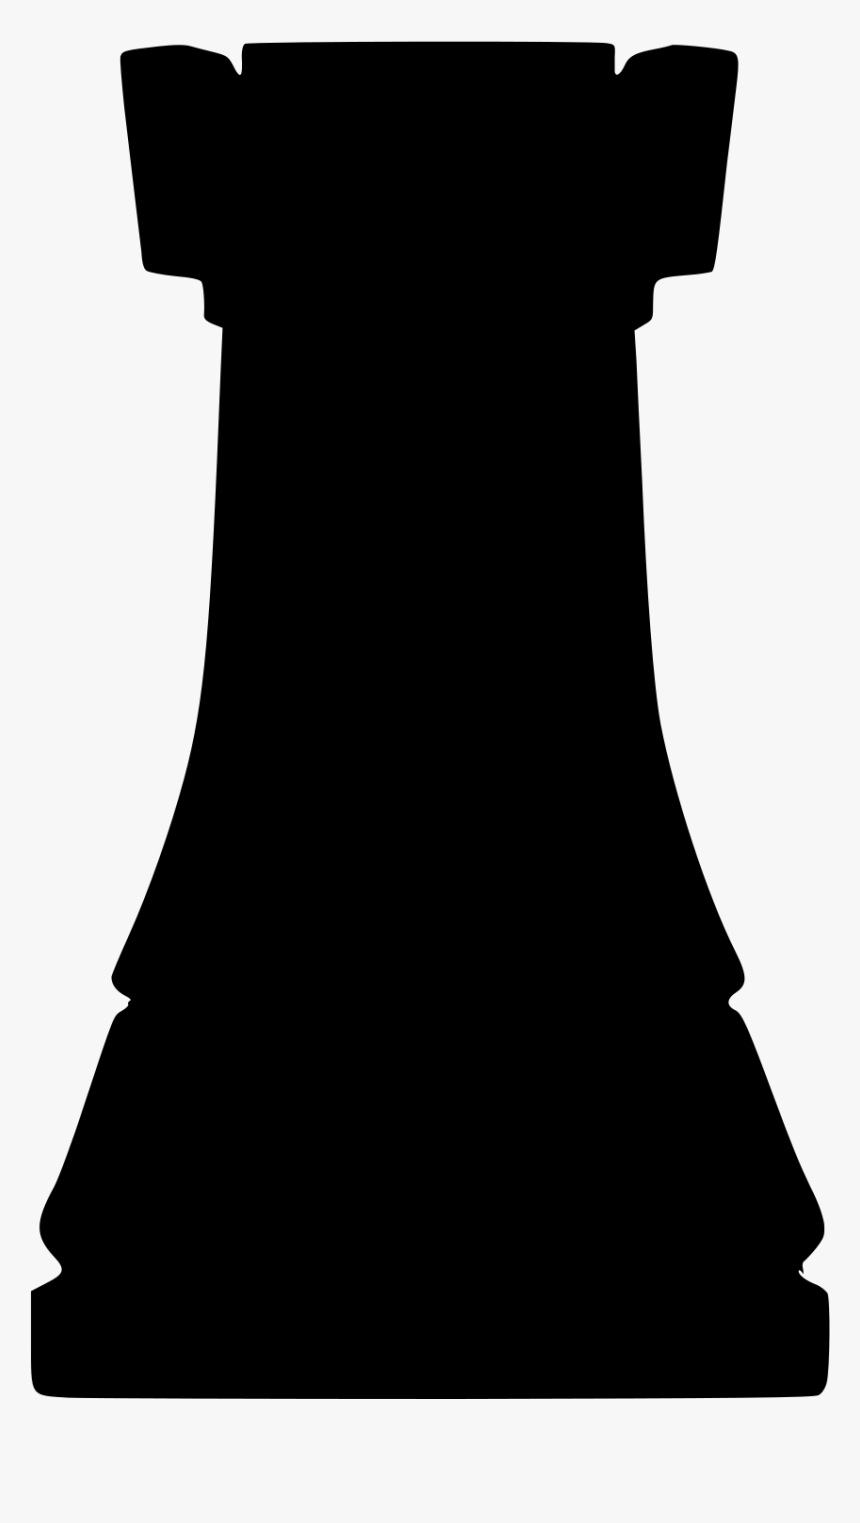 Silhouette Chess Piece Remix Rook / Torre Clip Arts - Rook Chess Piece Silhouette, HD Png Download, Free Download